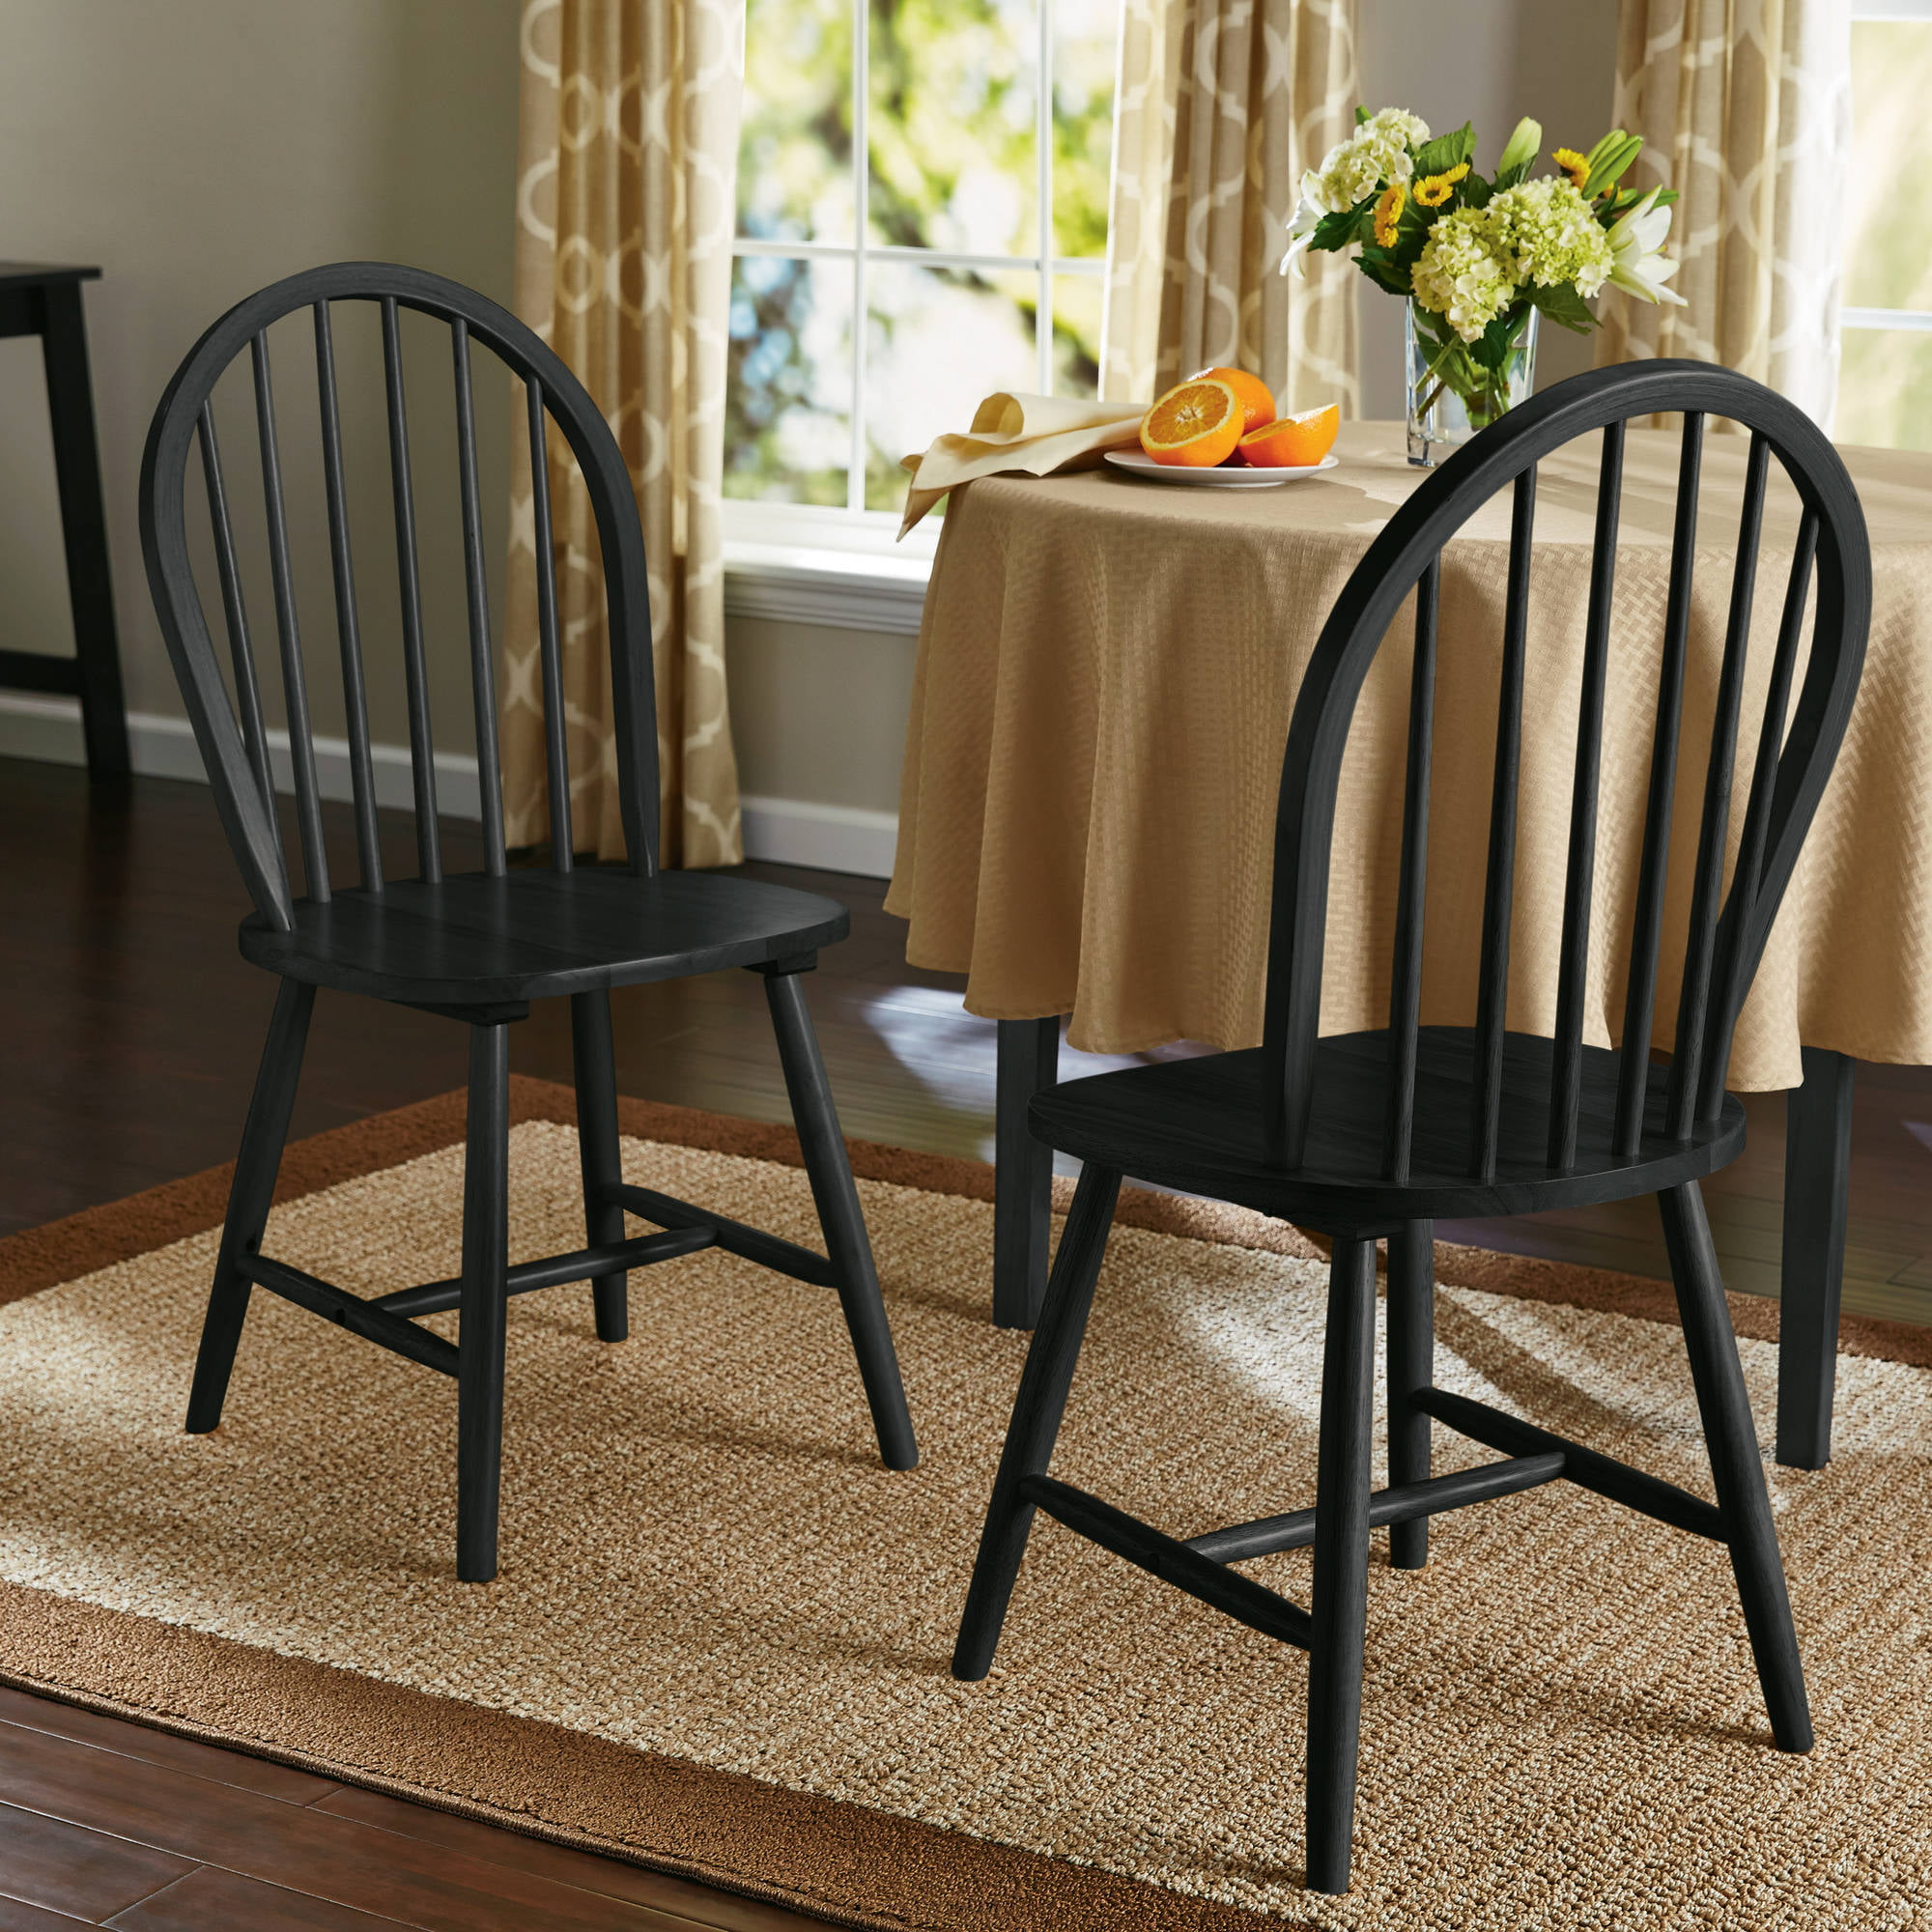 black spindle chairs